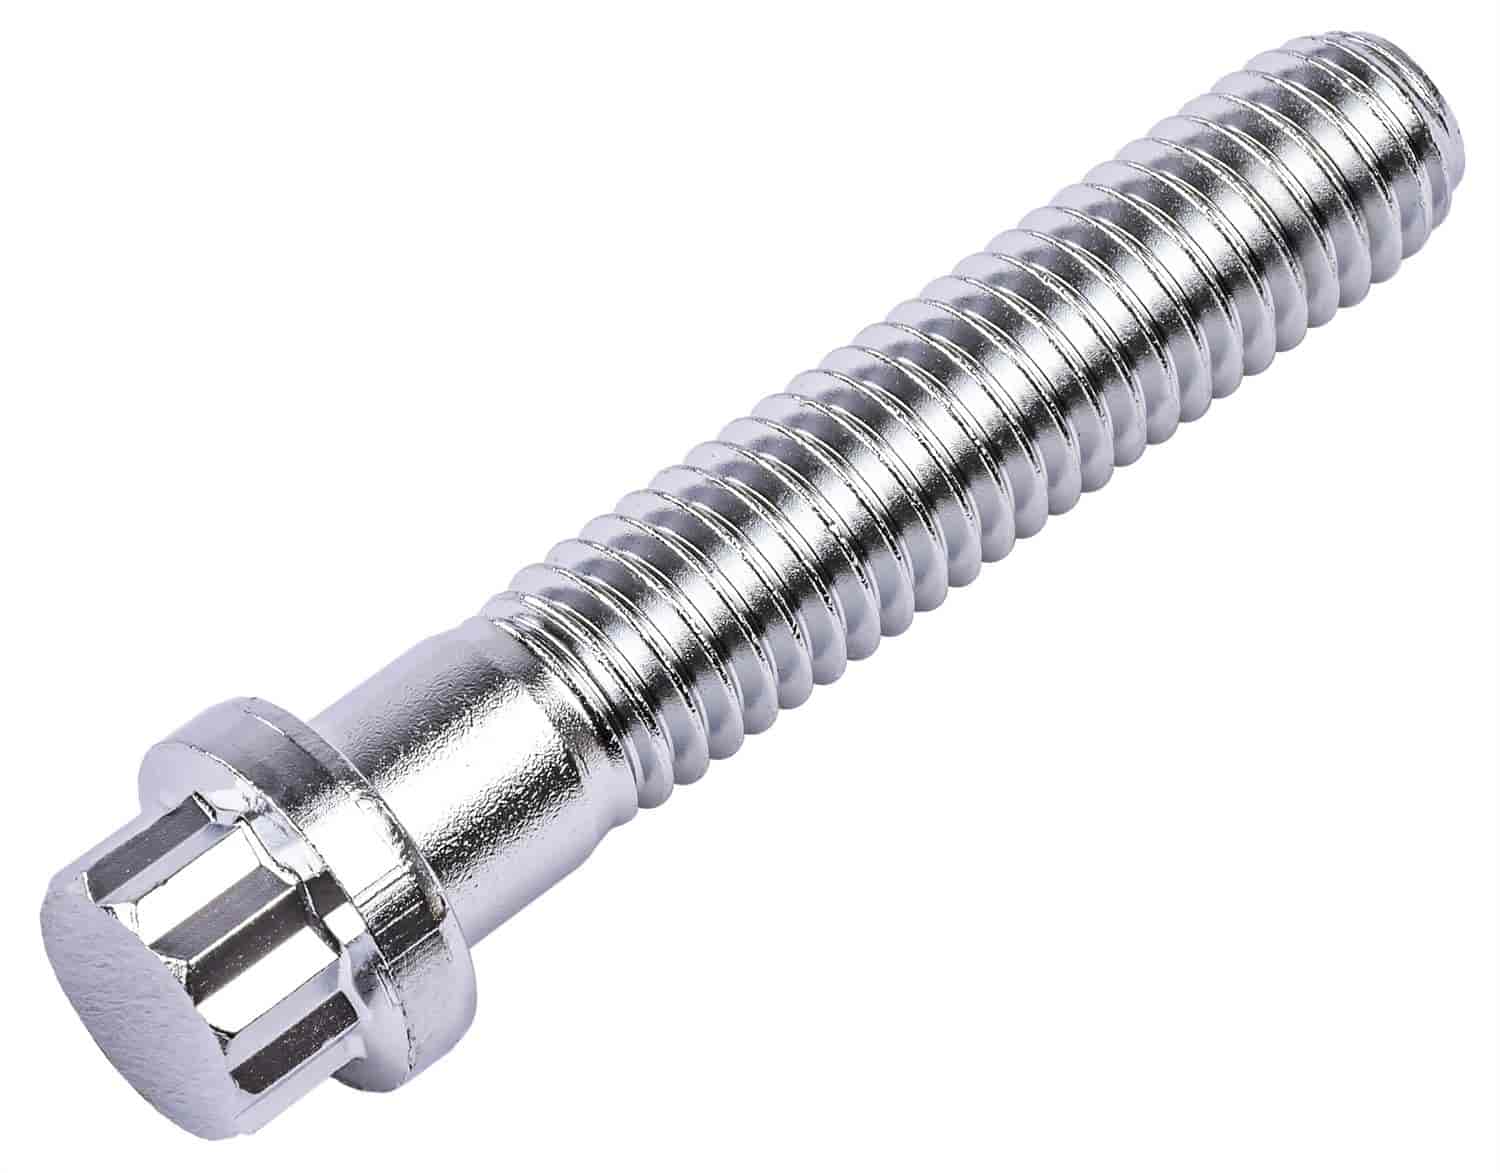 12-Point Fastener [3/8 in. -16 Thread x 2 in. Length]